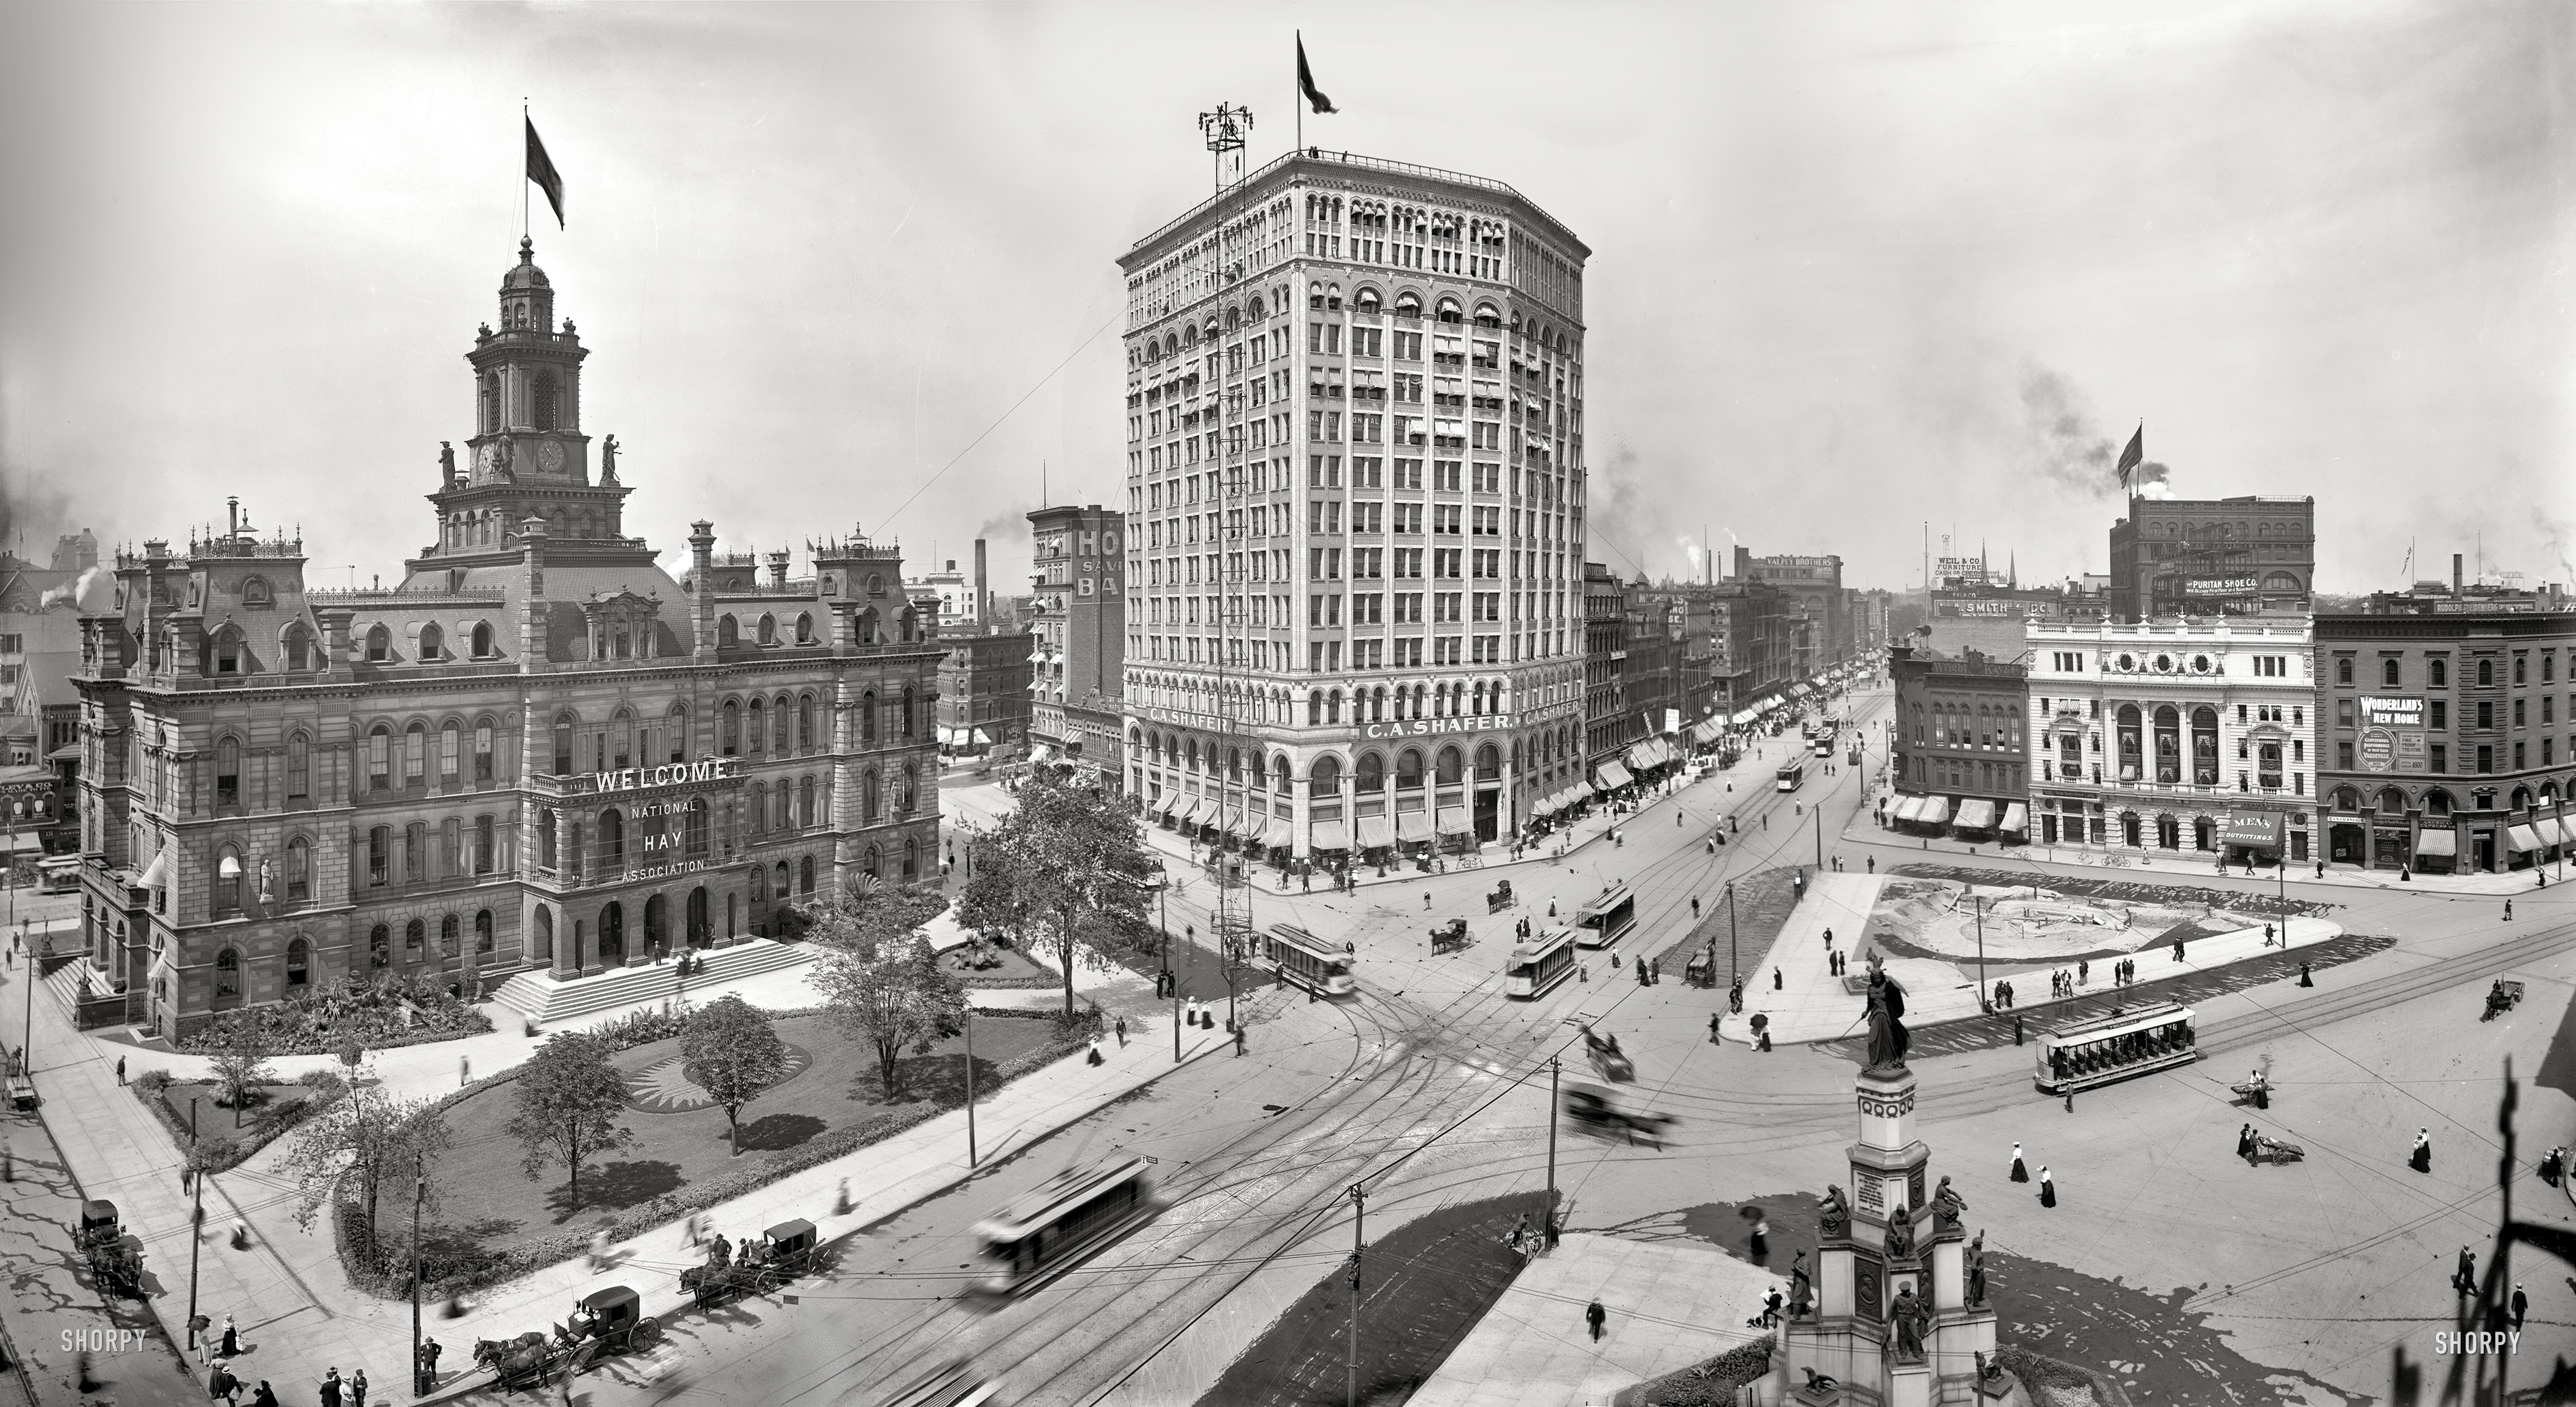 Detroit circa 1900. "Campus Martius and City Hall." Other landmarks in this panorama of three 8x10 glass negatives include the Soldiers and Sailors Monument, Detroit Opera House and the Majestic Building; also note the National Hay Association sign and "moonlight tower" arc lamp. View full size.